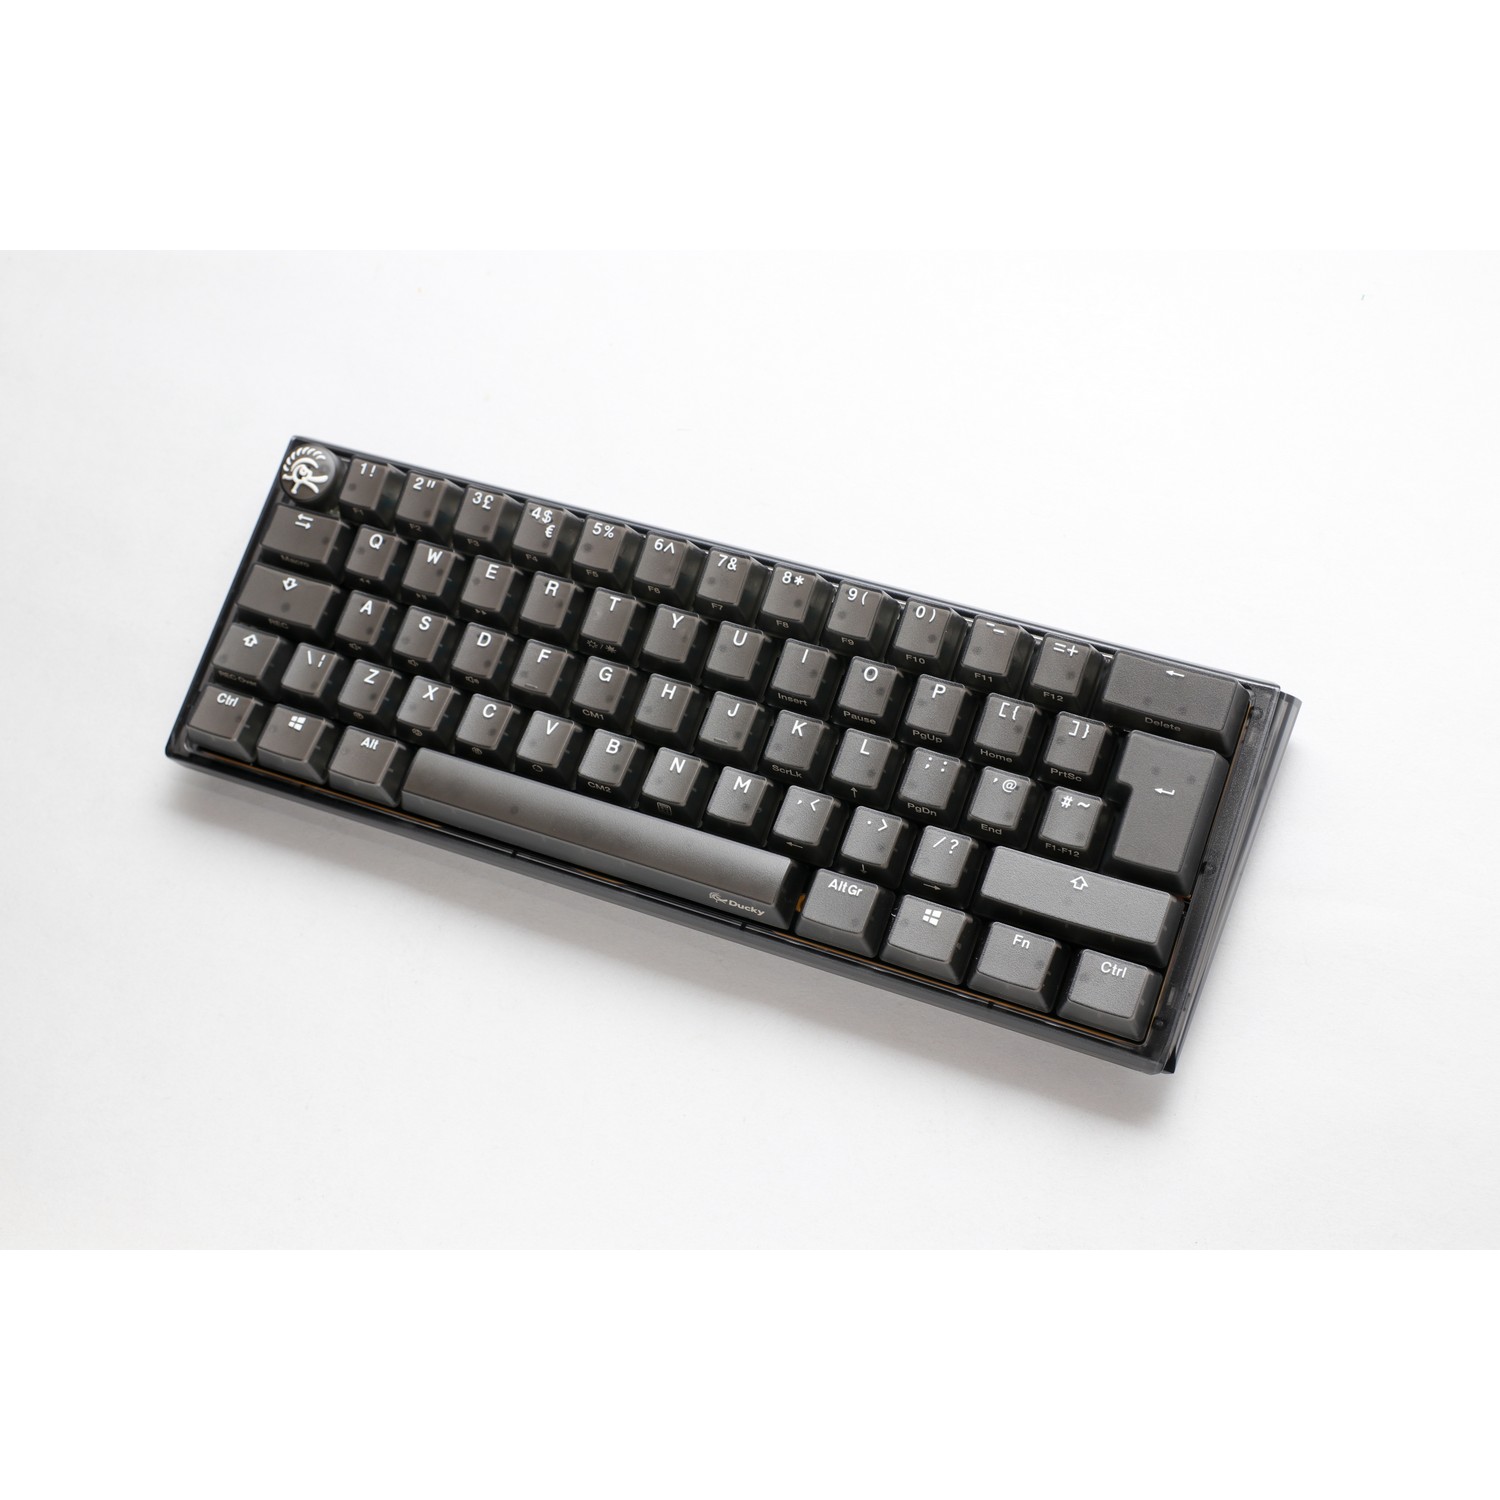 Ducky - Ducky One 3 Aura Mini 60% Mechanical Gaming Keyboard Black UK Layout Cherry Silent Red Switch